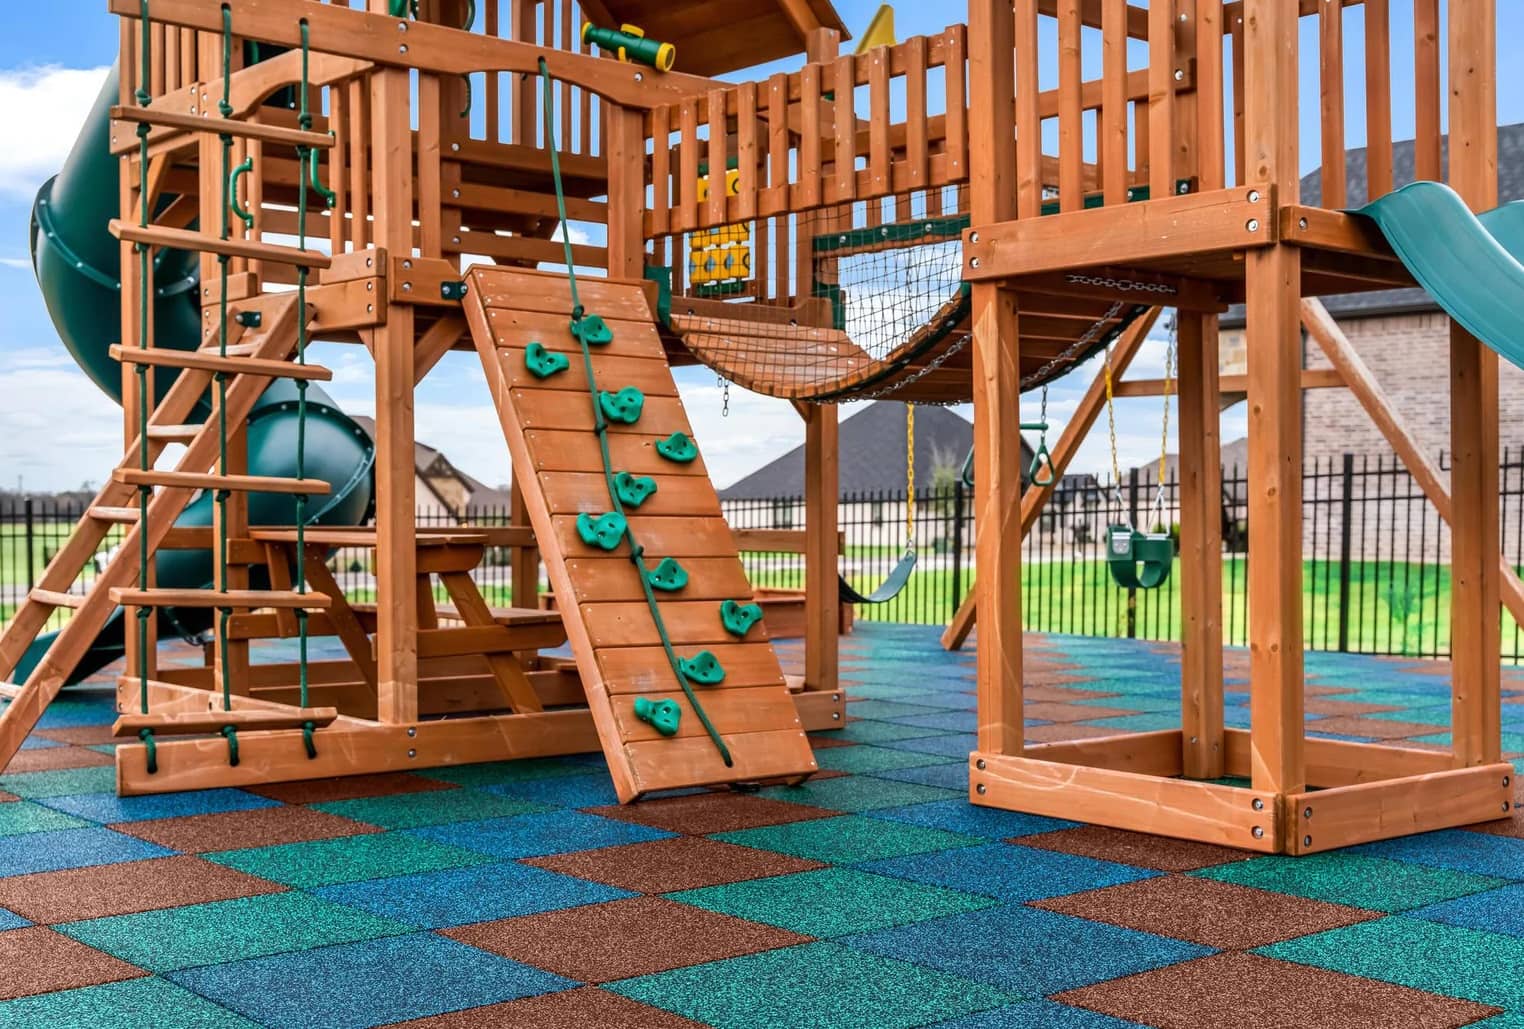 Who Can Install Rubber Tiles For Play Area In Hollister, CA